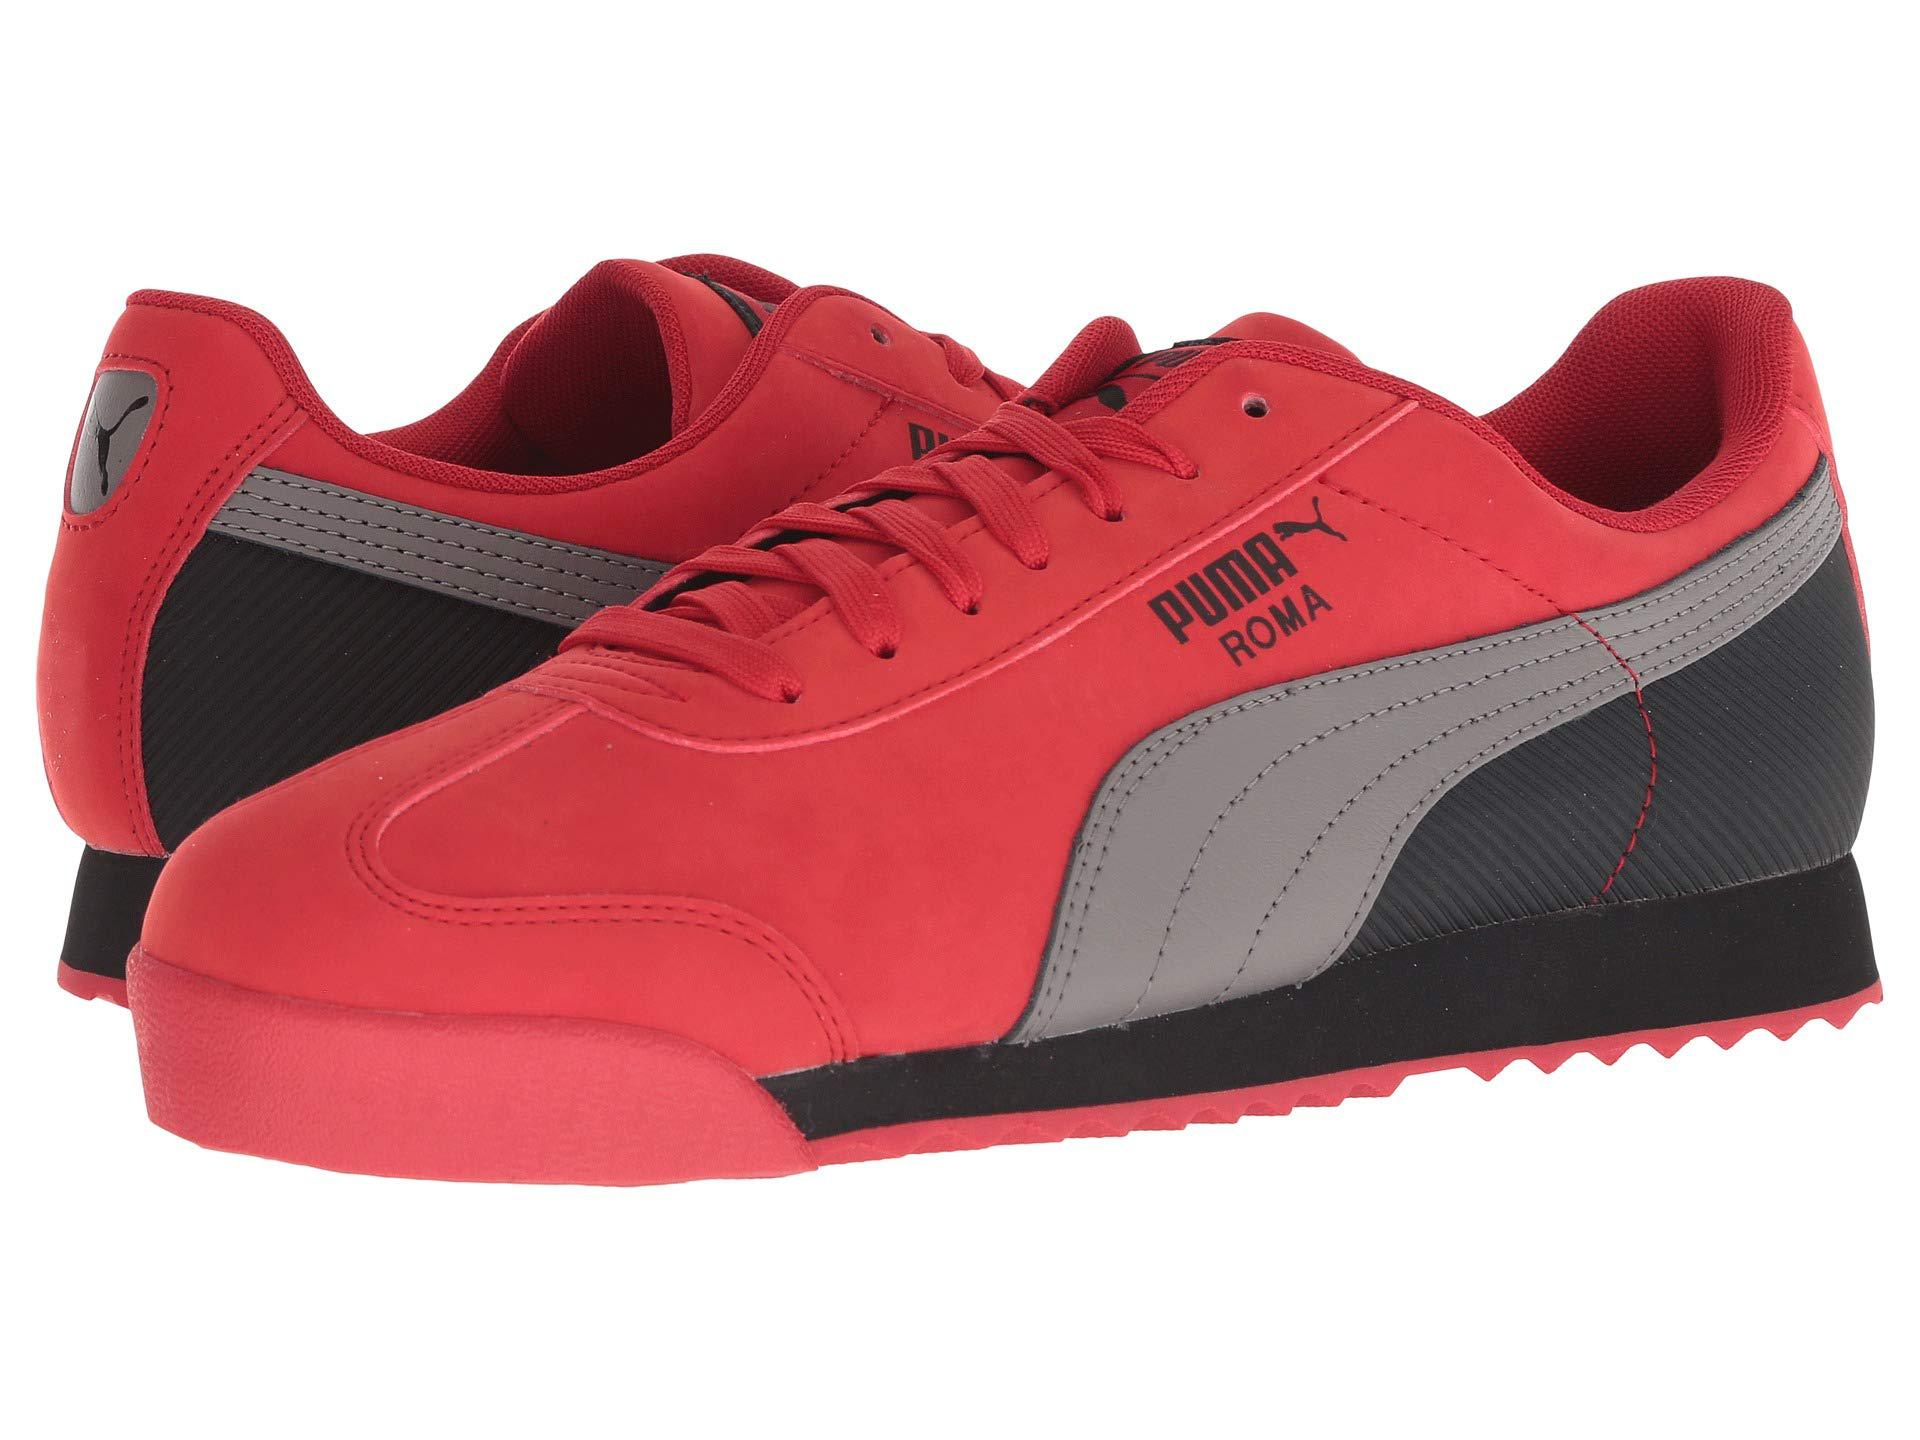 puma shoes red and black